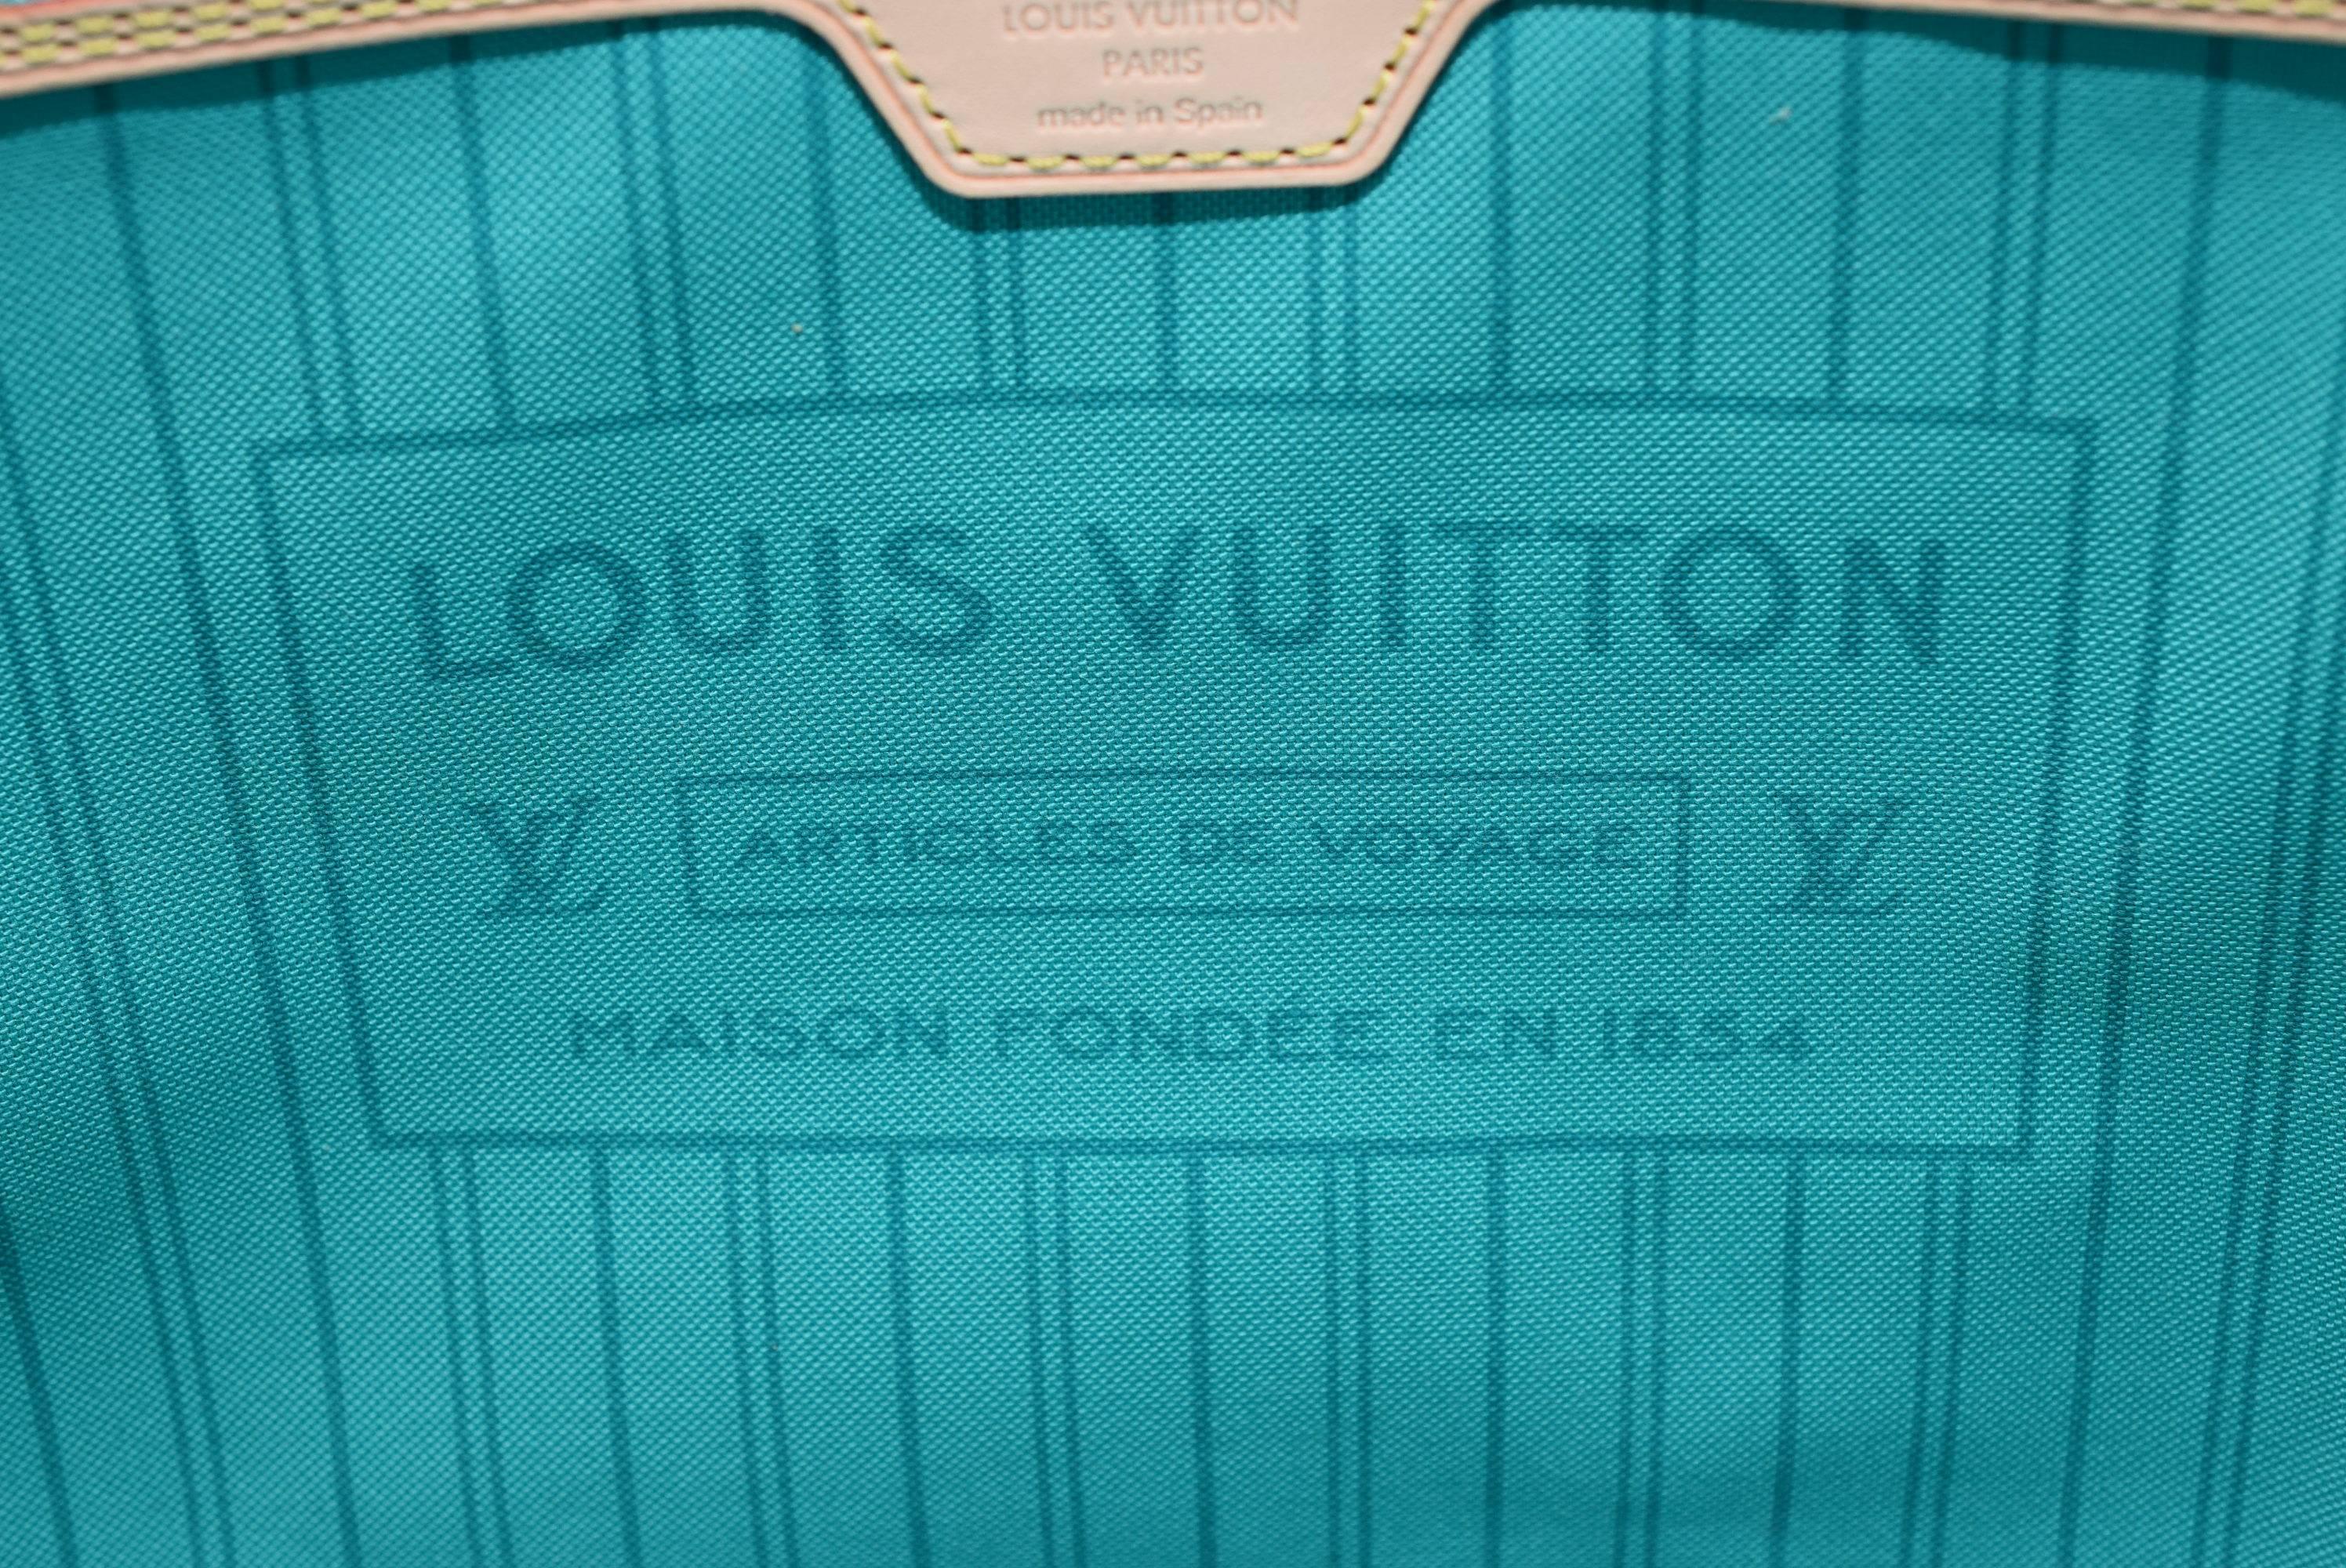 LOUIS VUITTON Limited Edition Monogram V Neverfull Mm Turquoise Tote Bag In New Condition In New York, NY